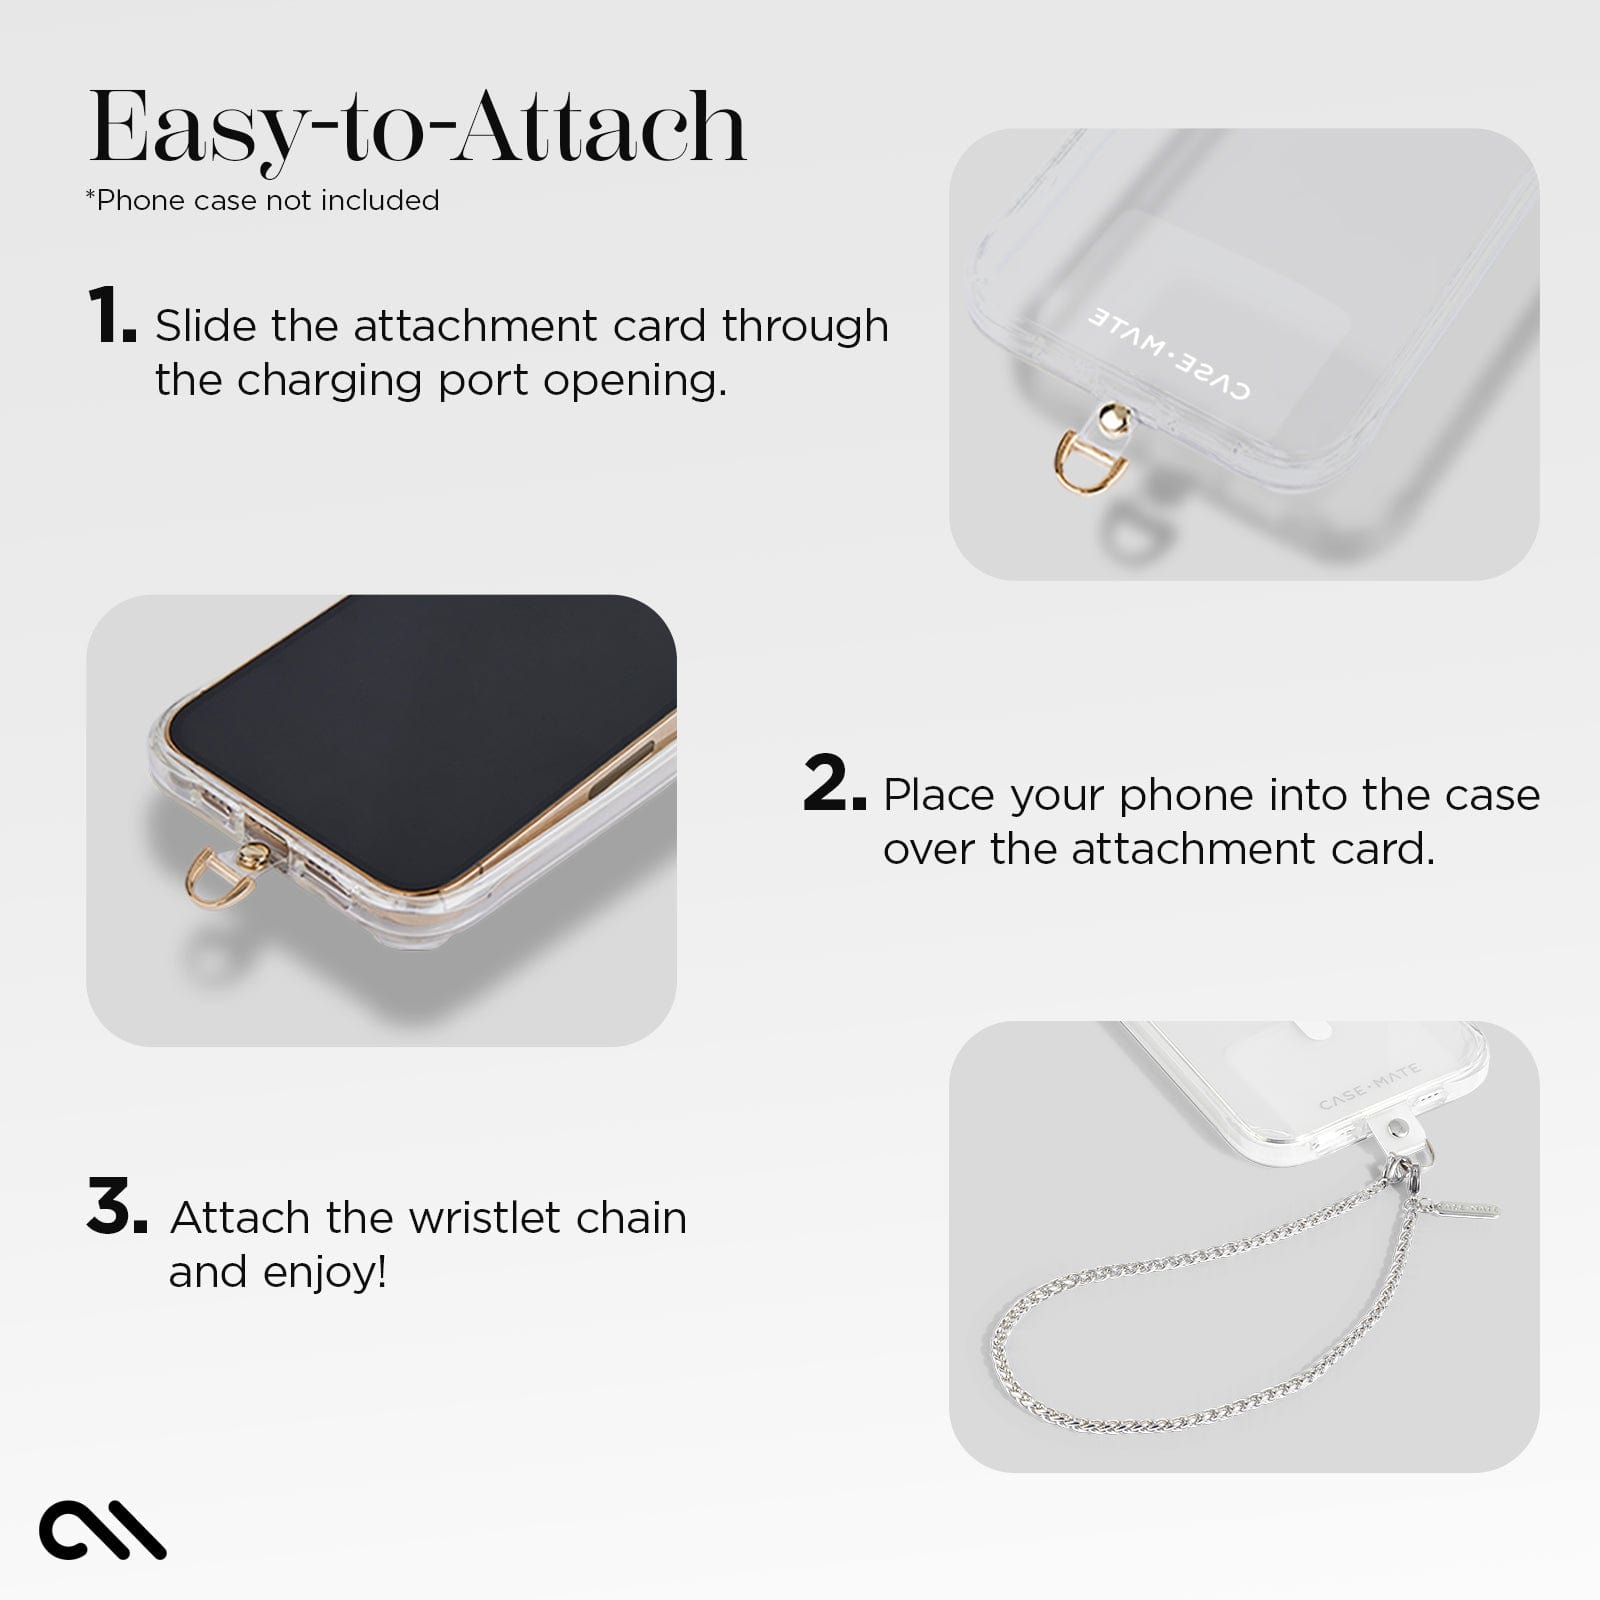 EASY-TO-ATTACH. 1. SLIDE THE ATTACHMENT CARD THROUGH THE CHARGING PORT OPENING. 2. PLACE YOUR PHONE INTO THE CASE OVER ATTACHMENT CARD. 3. ATTACH THE WRISTLET CHAIN AND ENJOY!